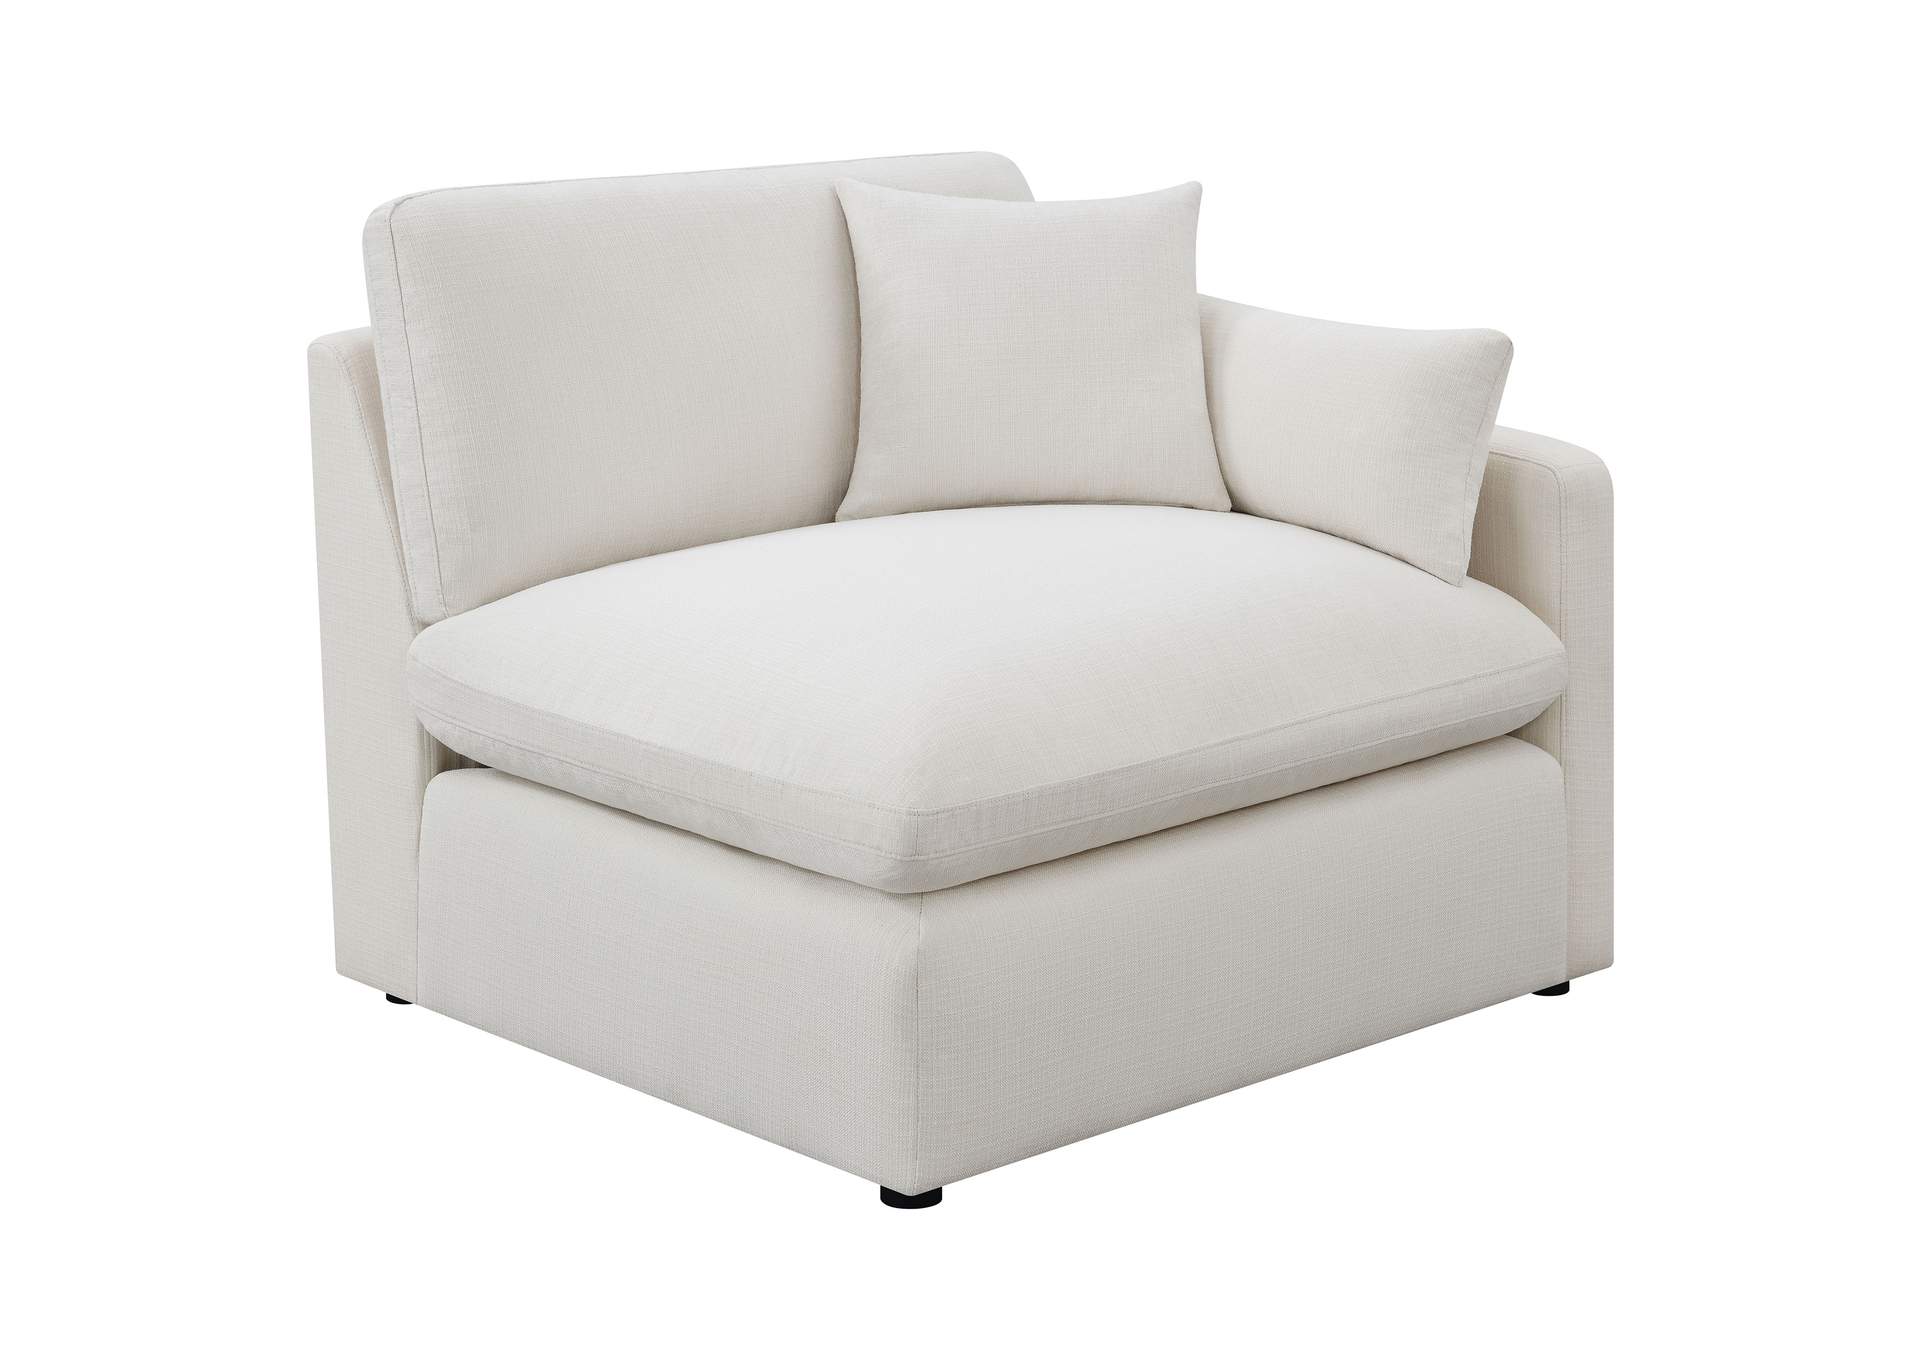 Hobson 6-piece Reversible Cushion Modular Sectional Off-White,Coaster Furniture